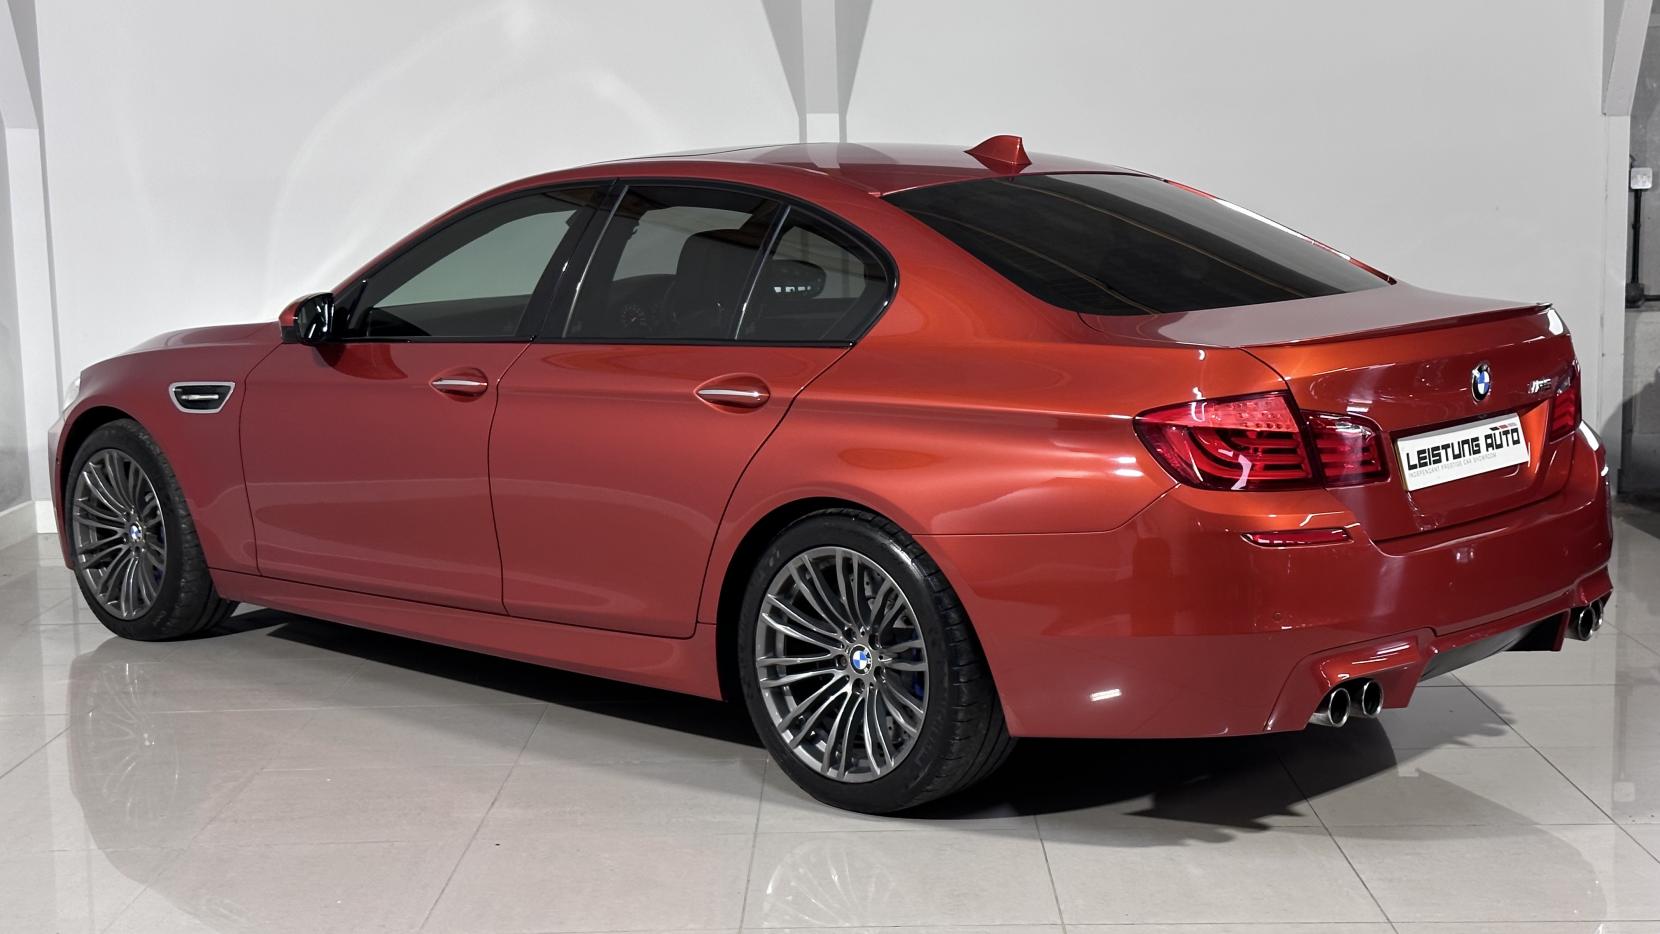 BMW M5 4.4 V8 Saloon 4dr Petrol DCT Euro 5 (s/s) (560 ps)